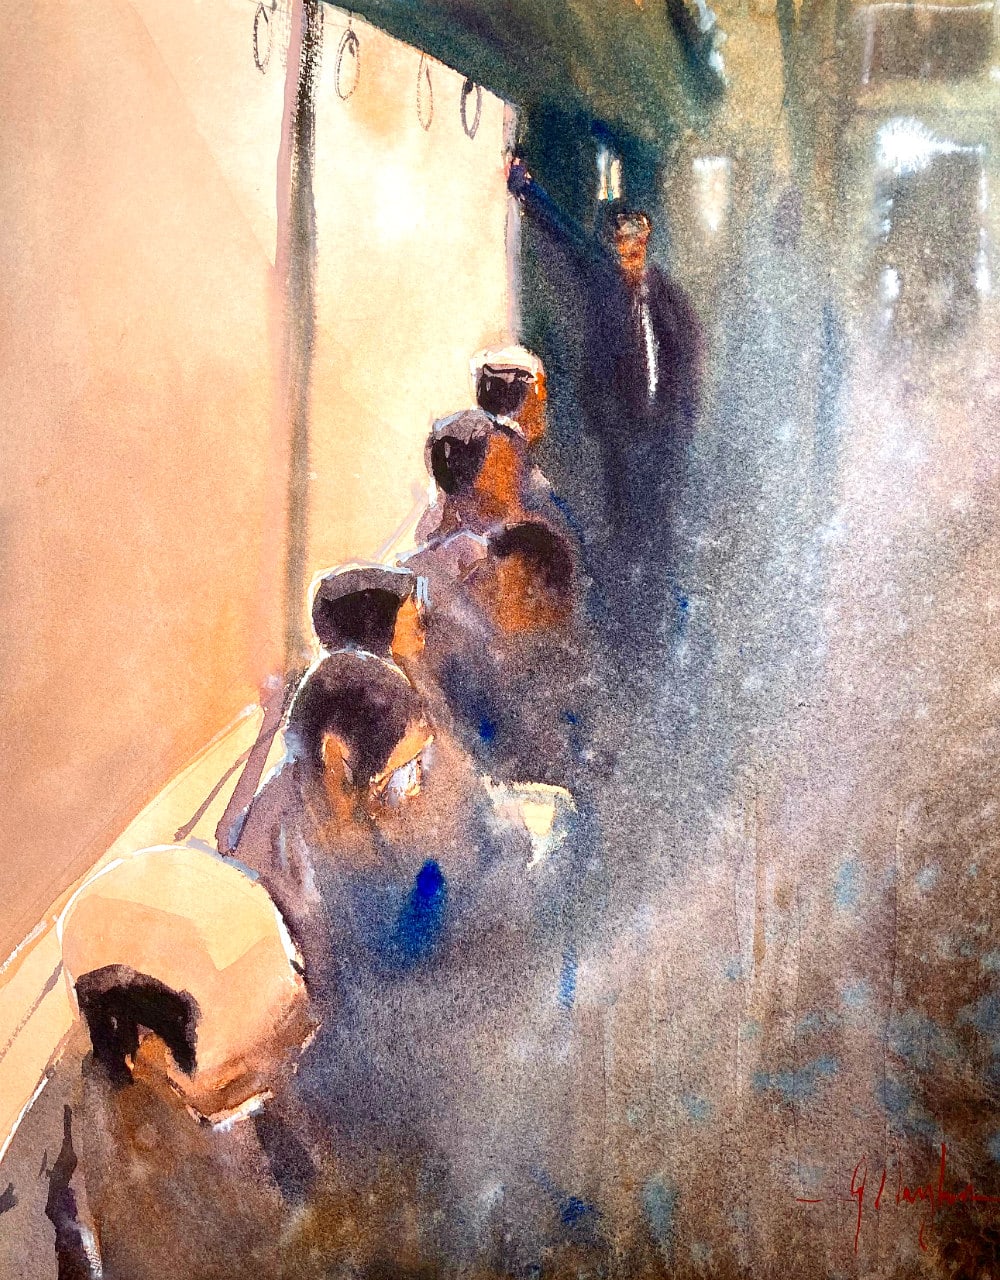 Watercolor painting of the sunlit interior of a Japanese train